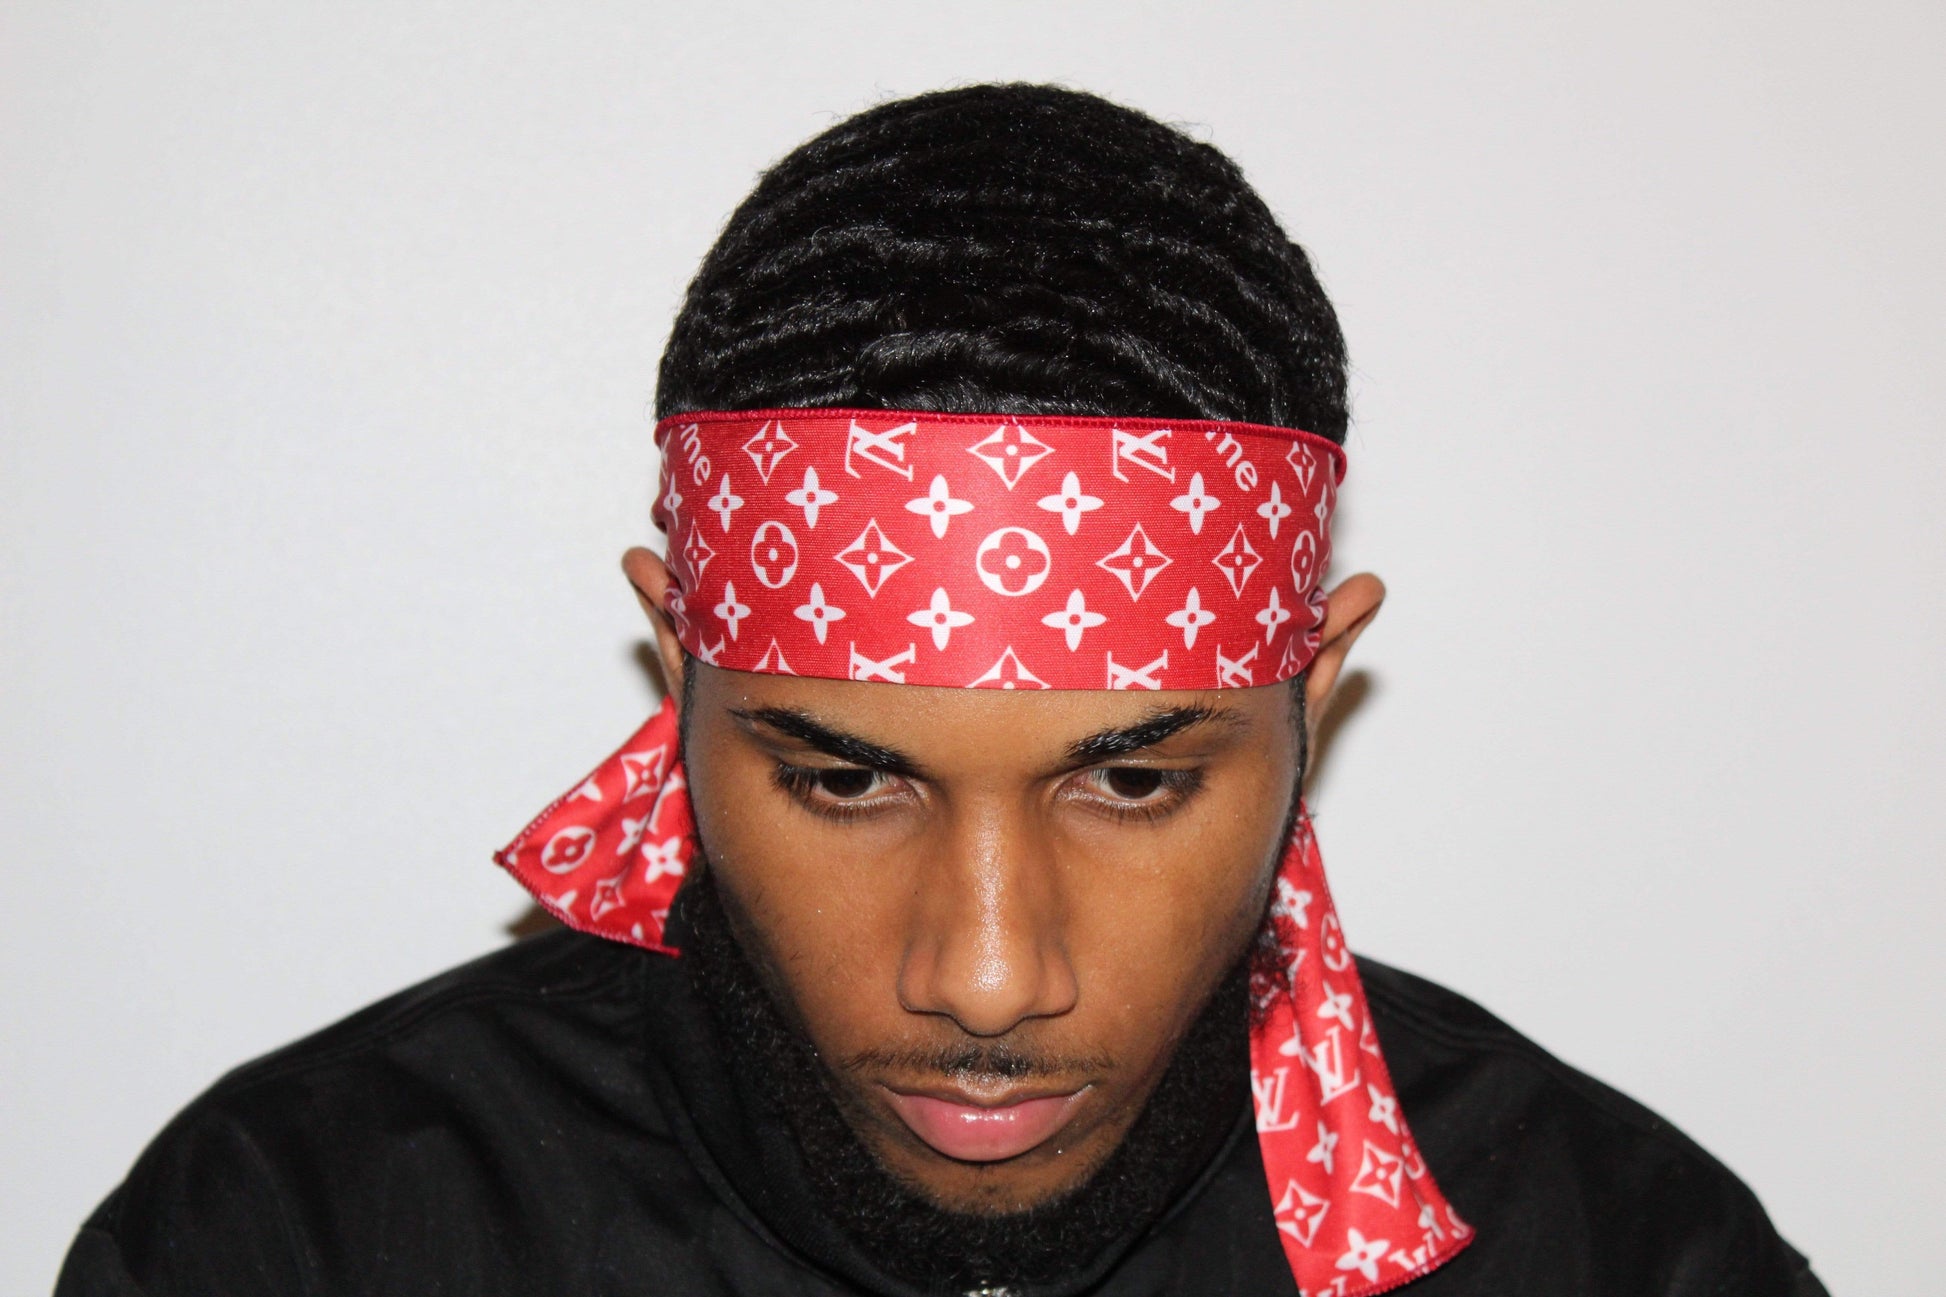 Drippy Rags Durags Bonnets Headbands Headwear More Headbands 5 headband Mystery Pack (Limited Time Only)